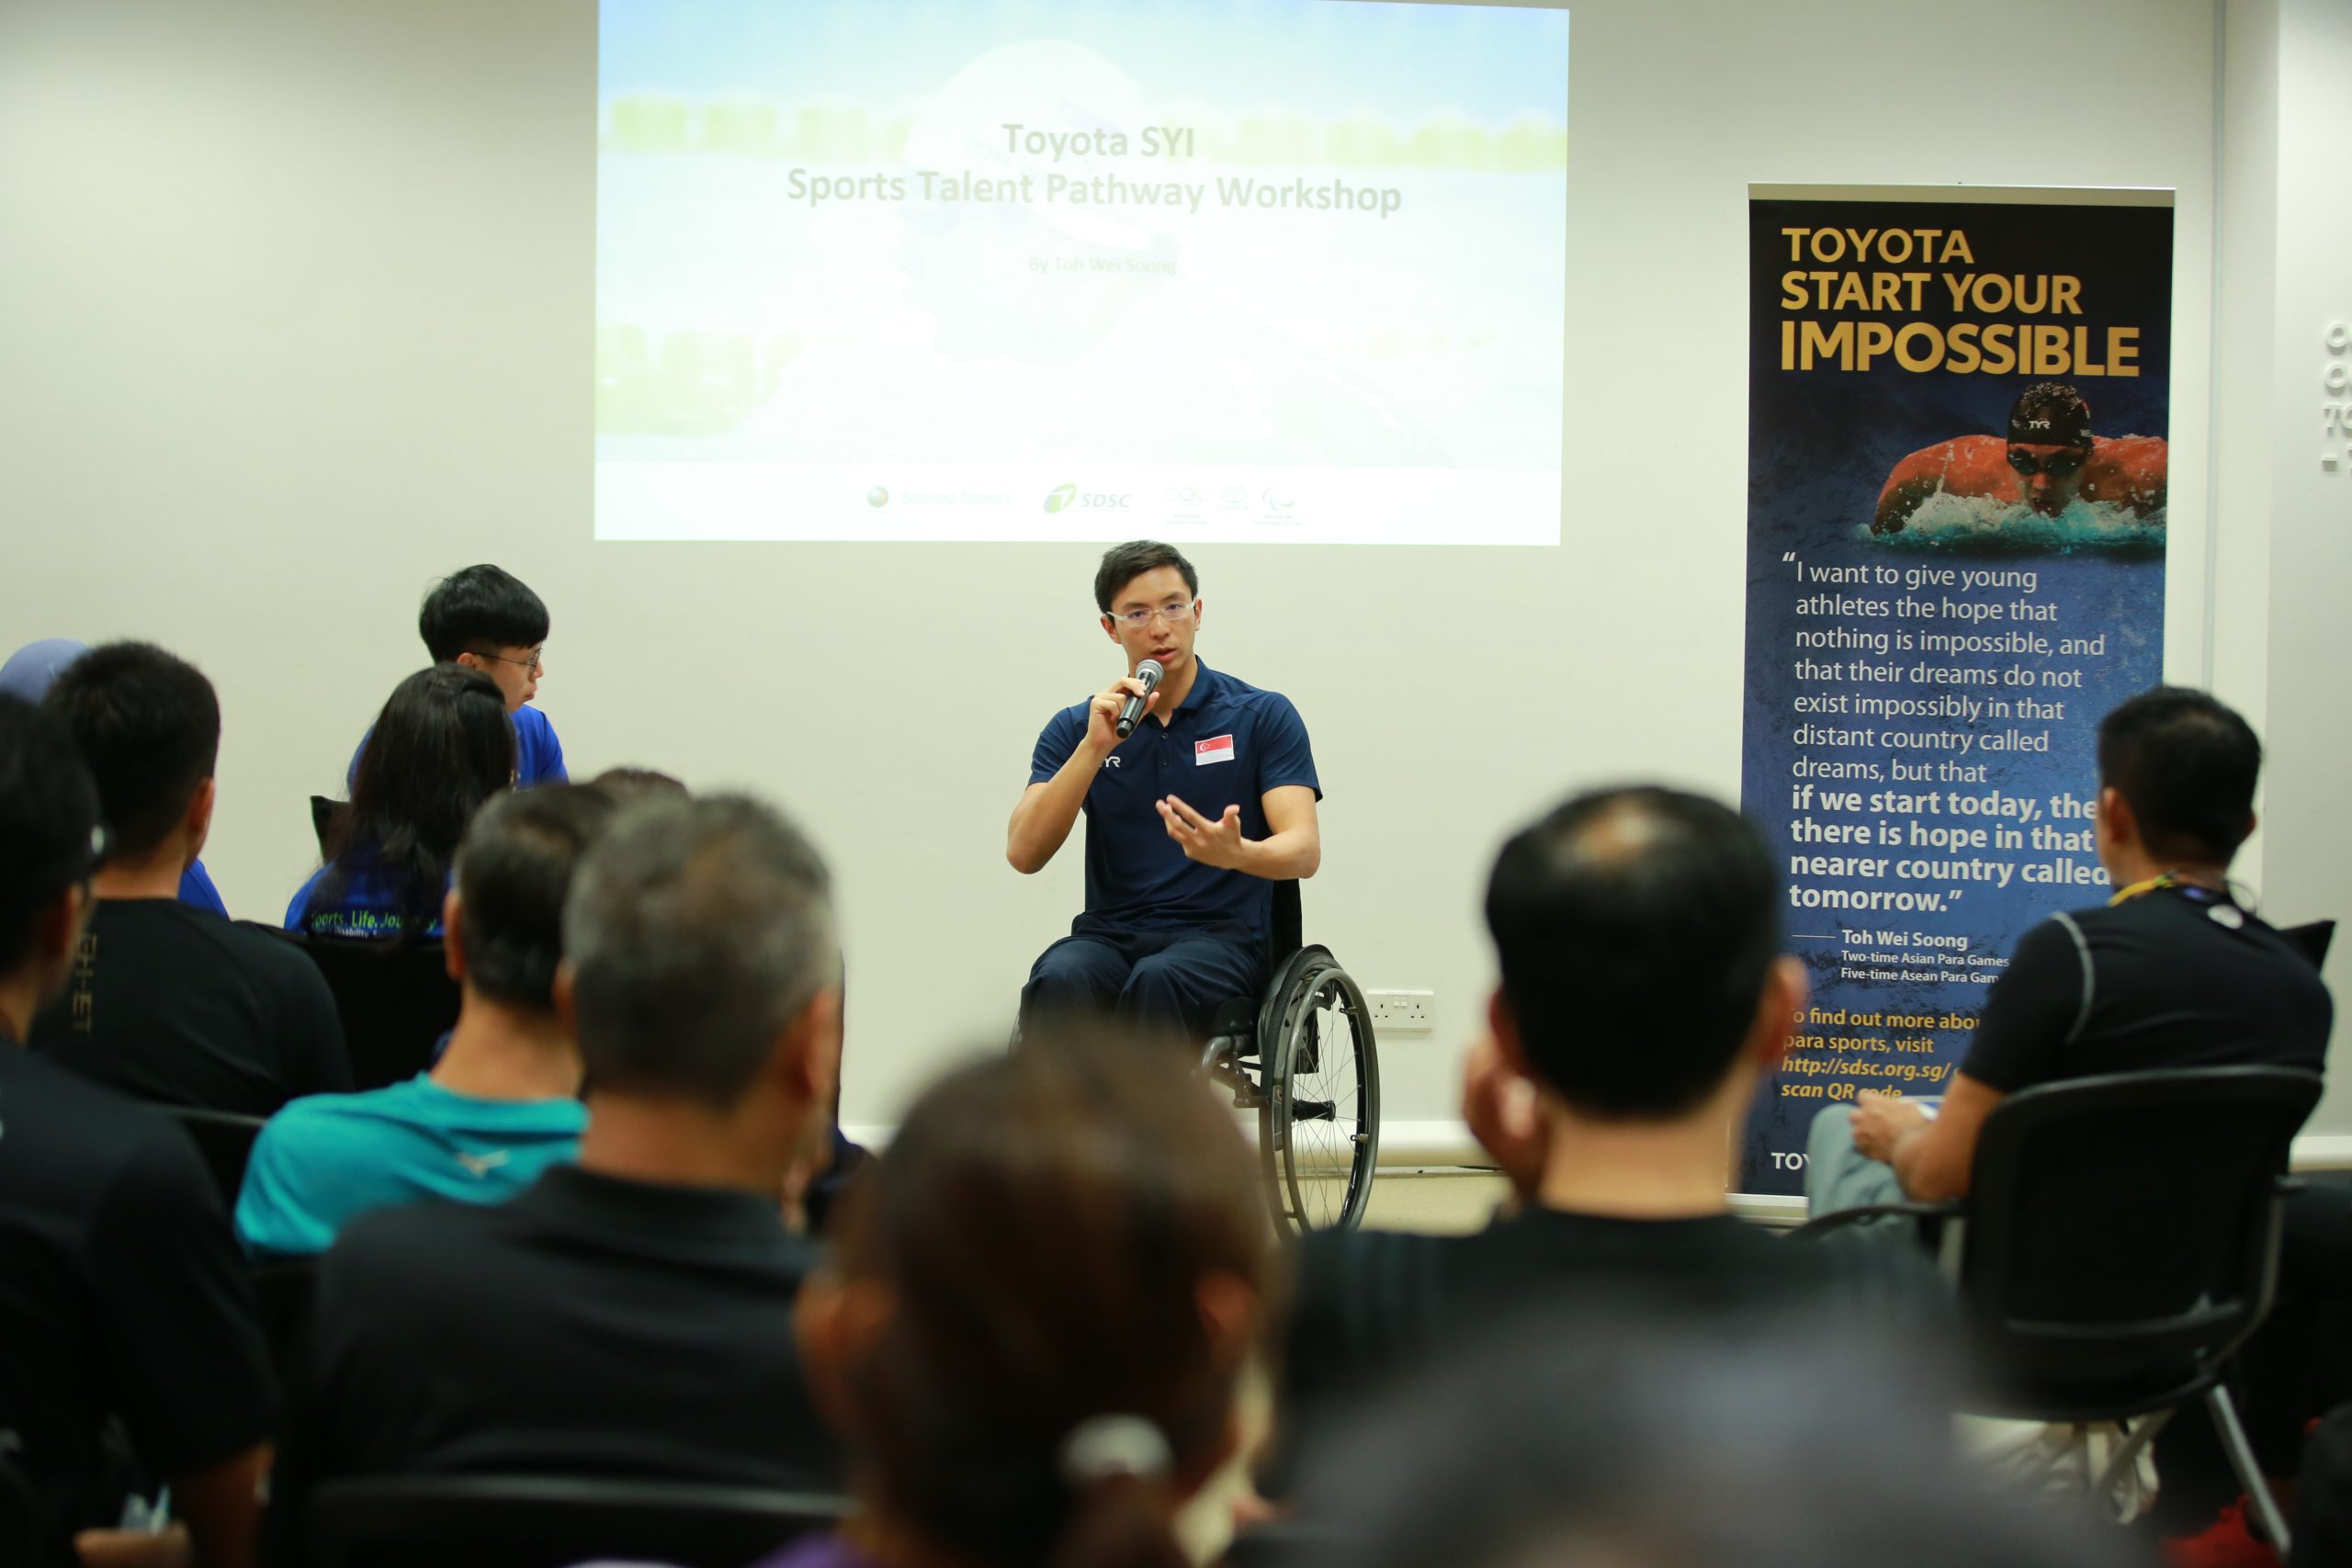 Toyota SYI (11) - Toh Wei Soong sharing about his swimming journey